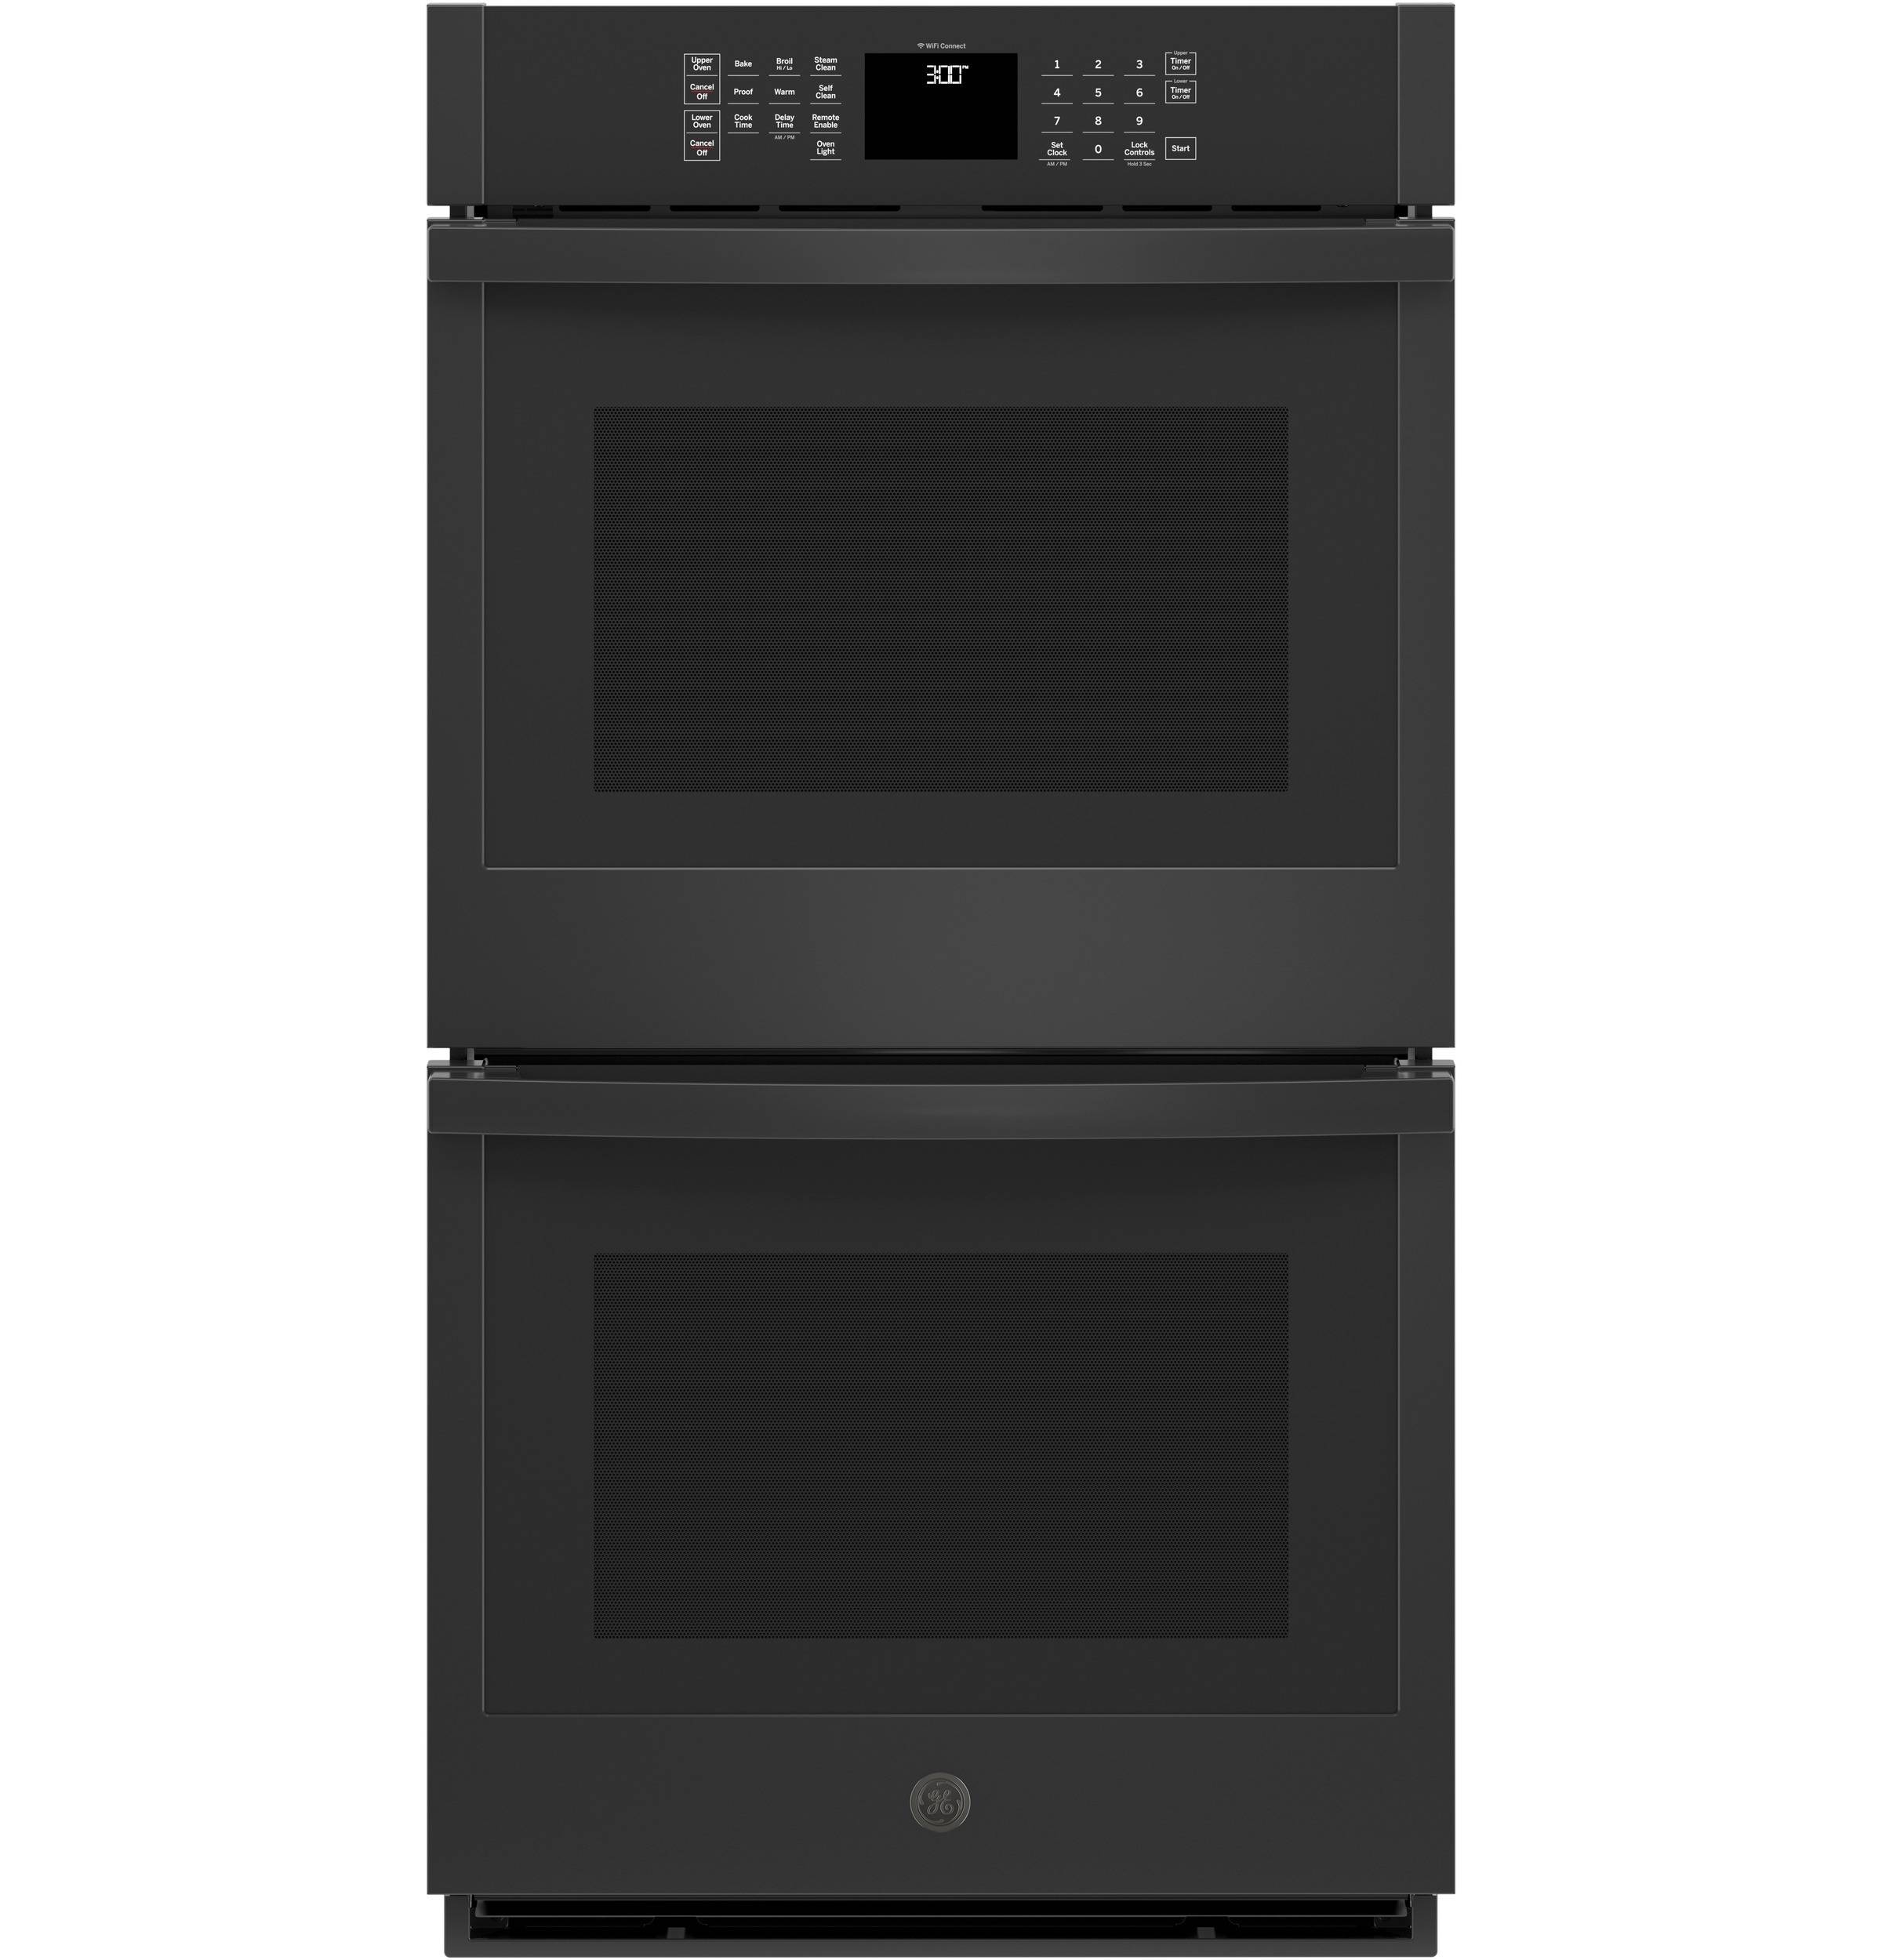 GE® 27" Built-In Double Wall Oven (Black)